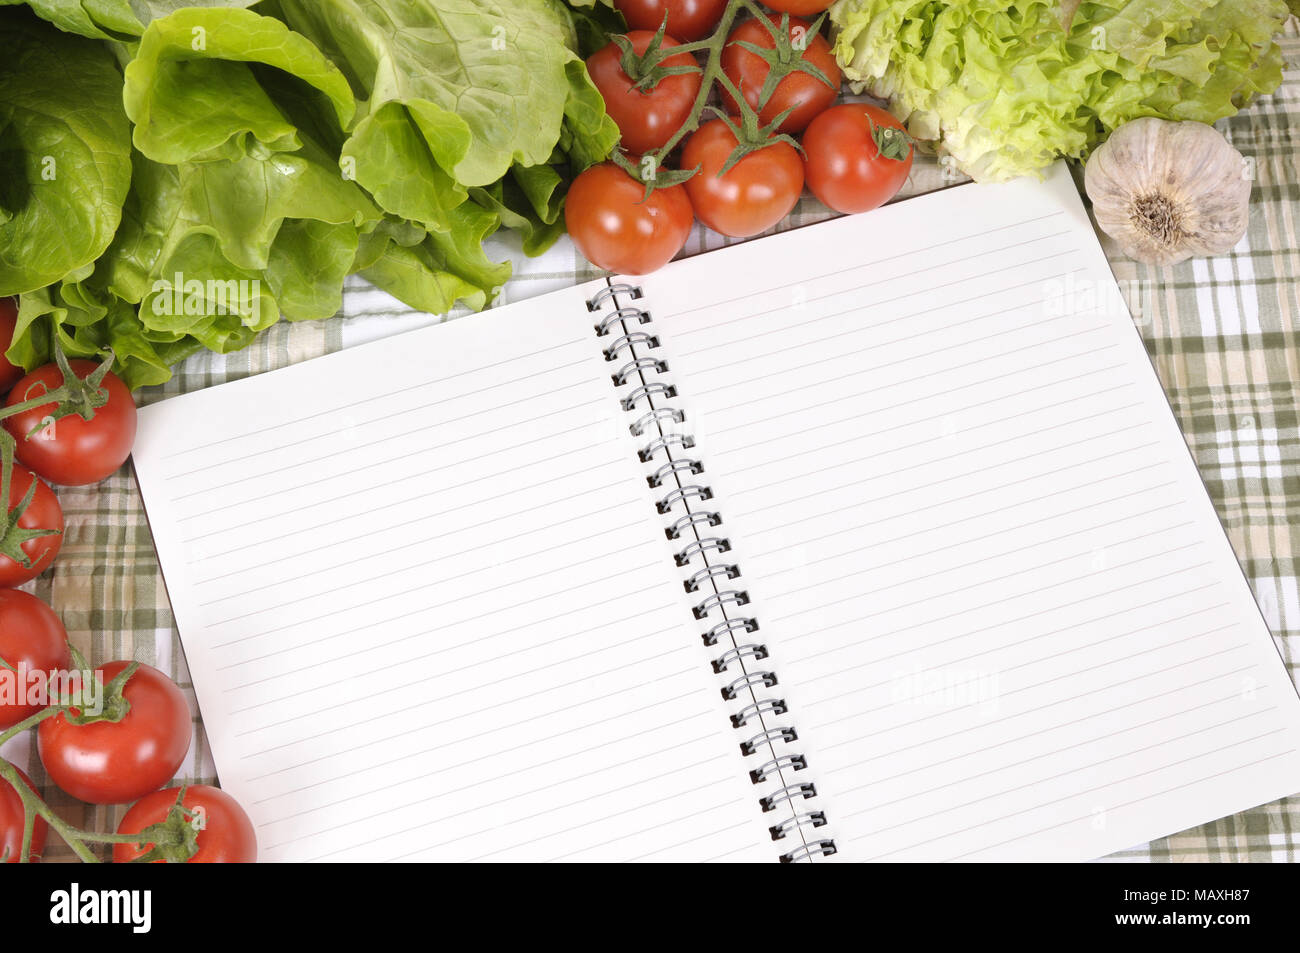 https://c8.alamy.com/comp/MAXH87/selection-of-salad-vegetables-with-blank-recipe-book-or-shopping-list-on-a-green-check-tablecloth-MAXH87.jpg